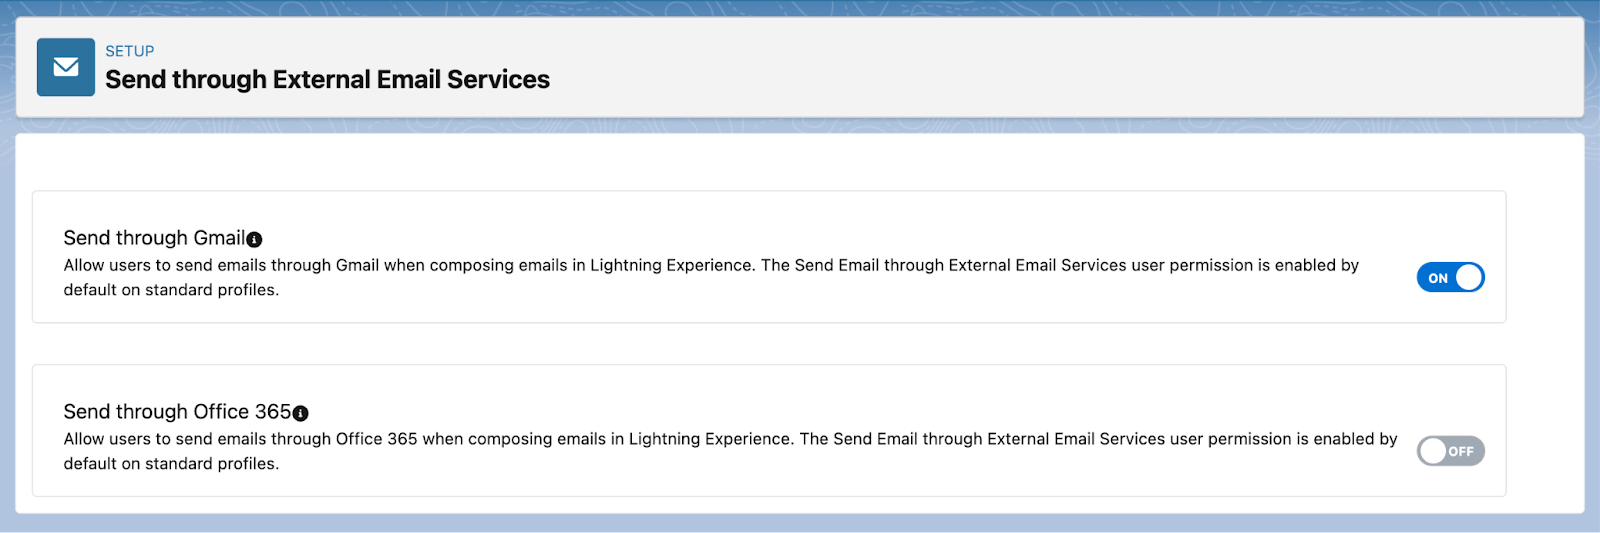 Configuring external email services in Lightning Experience 